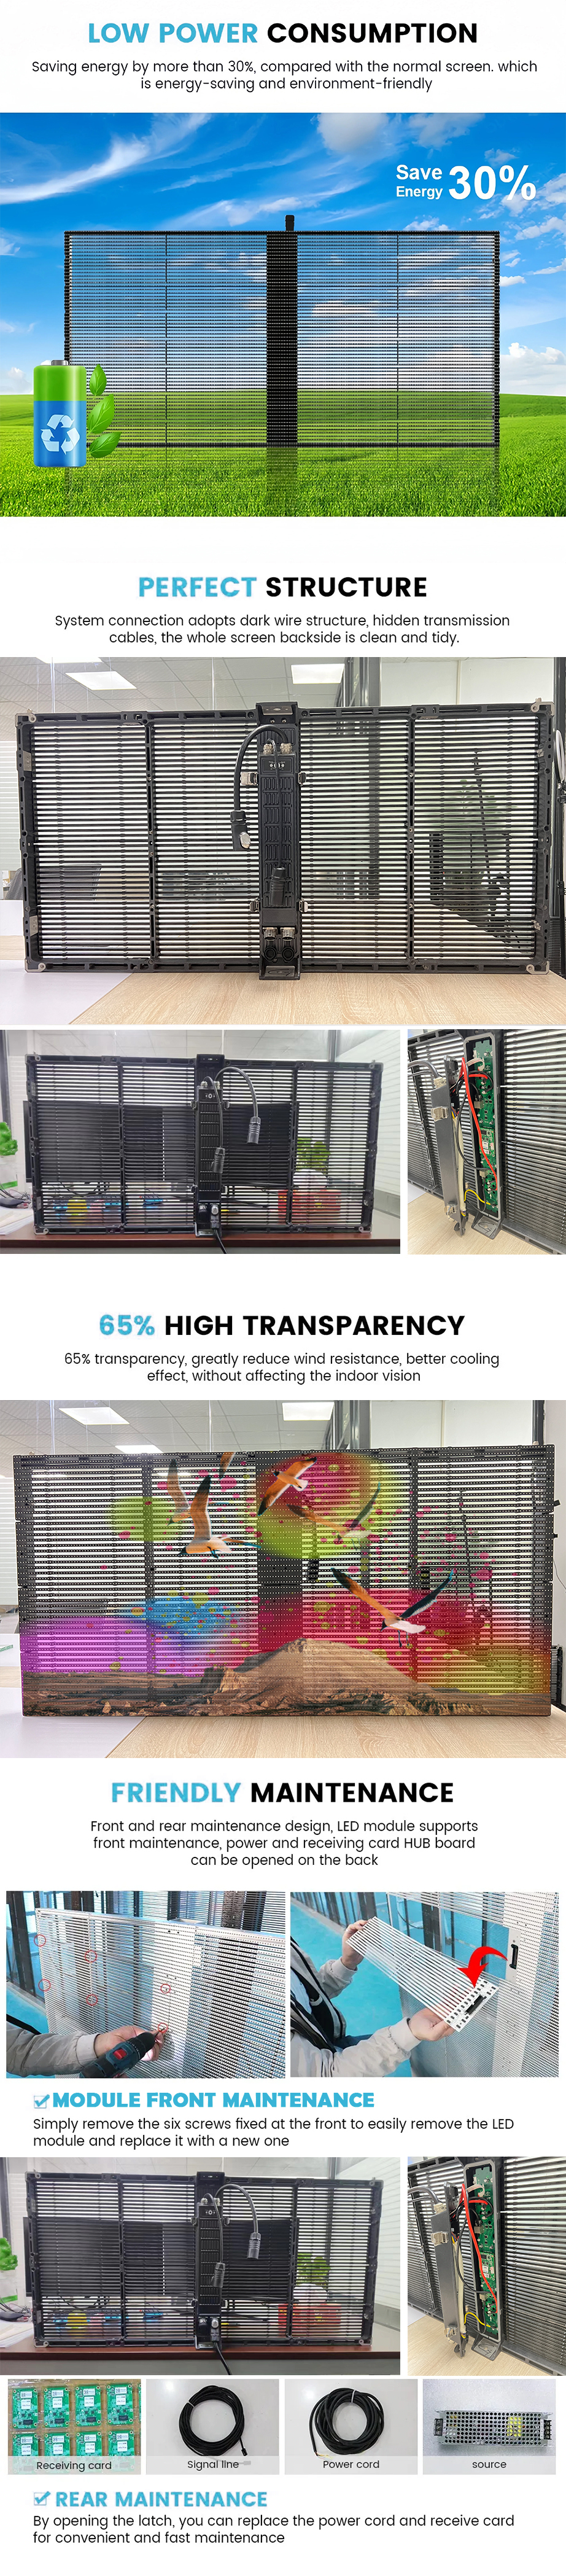 performance of transparent LED screen